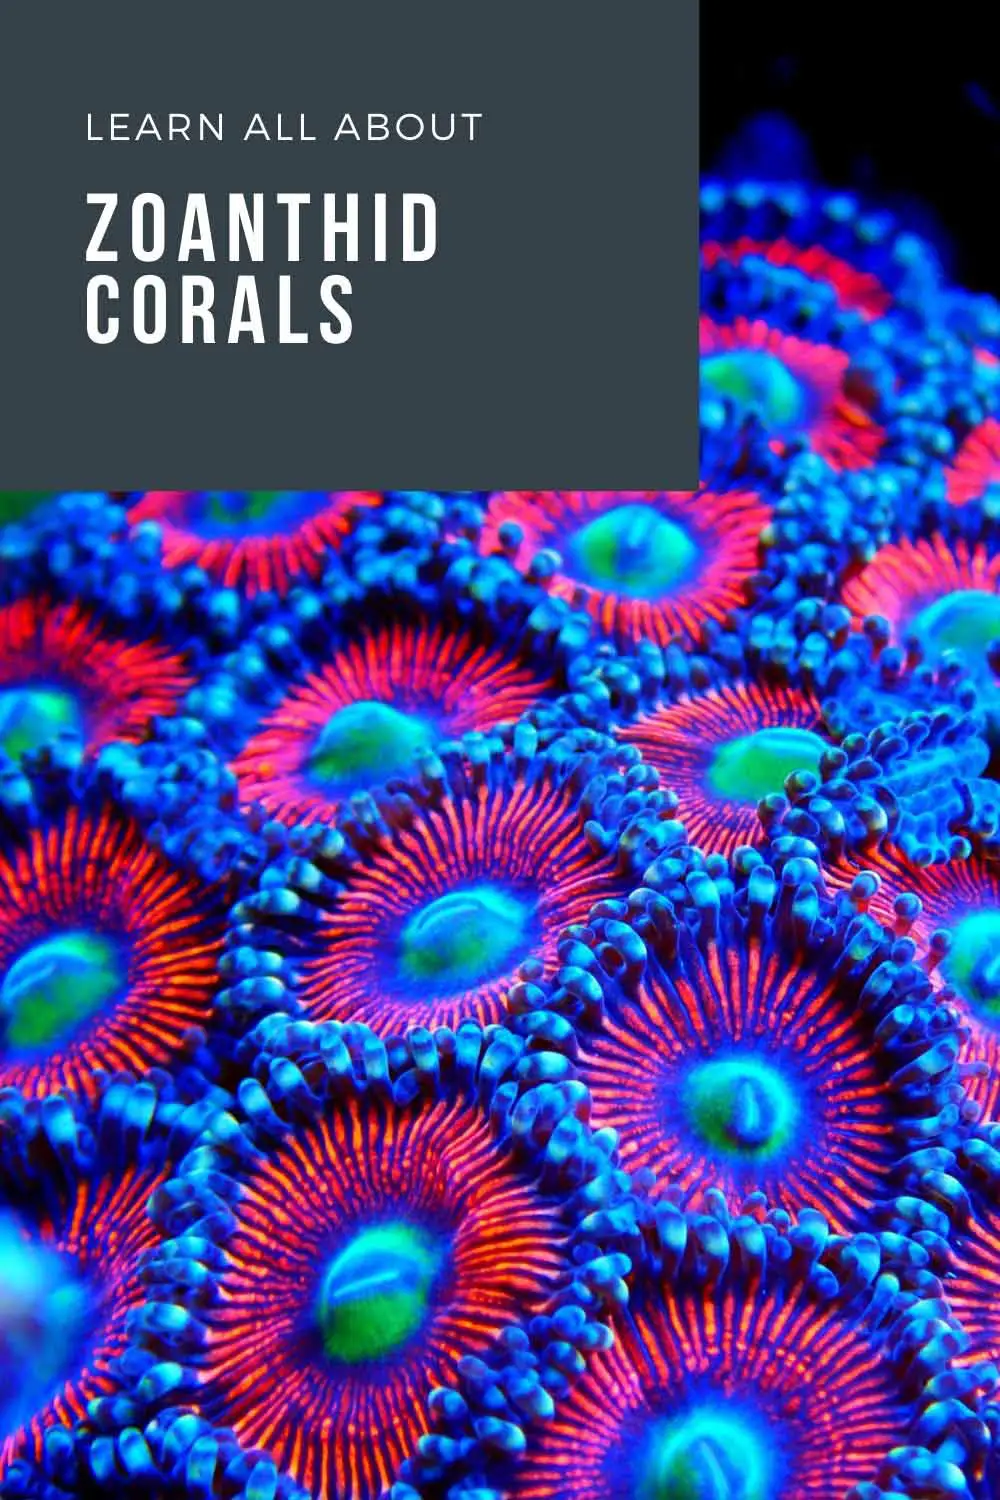 Zoanthids coral care guide